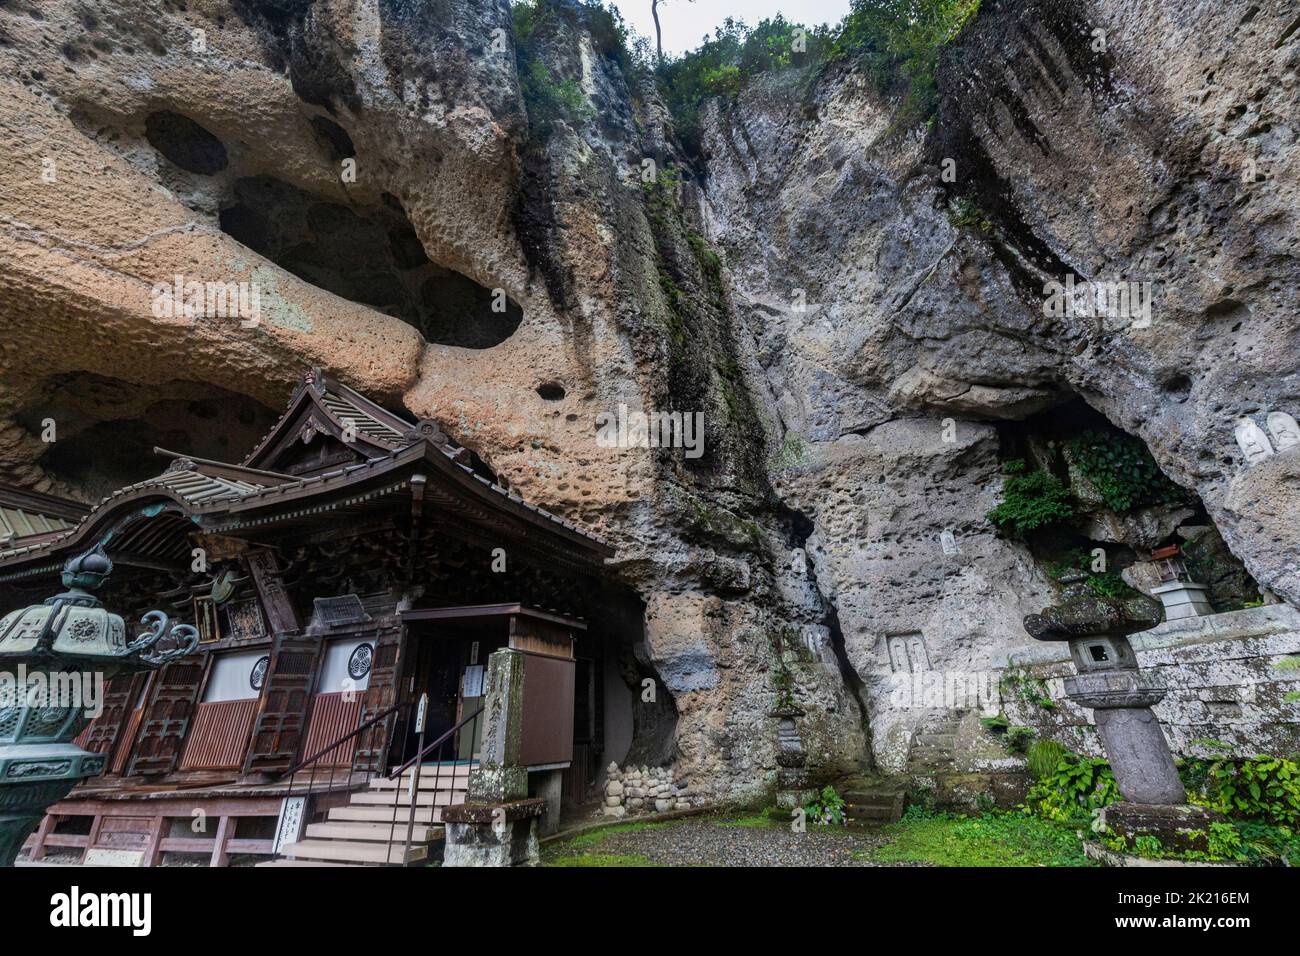 Stone Buddha Statues of Ooyaji Temple - Oyagi Temple is carved into a vertical rock face of Oya stone and the resulting cavern holds a series of impre Stock Photo